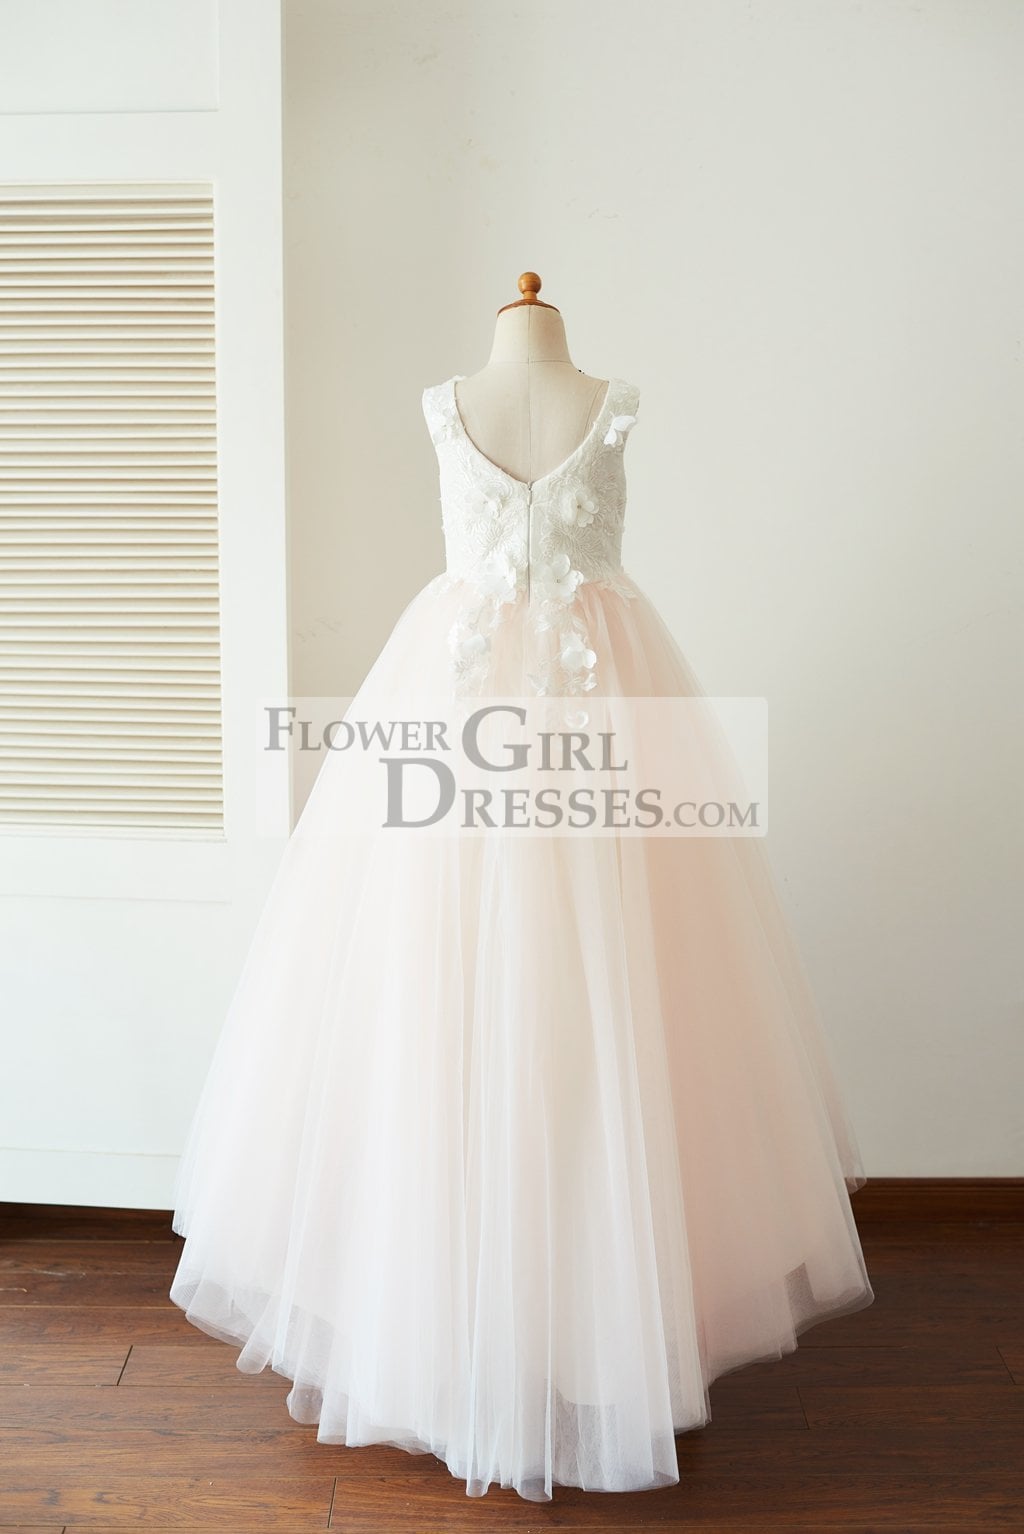 Ivory Lace Pink Tulle Wedding Party Flower Girl Dress with Butterfly Cape